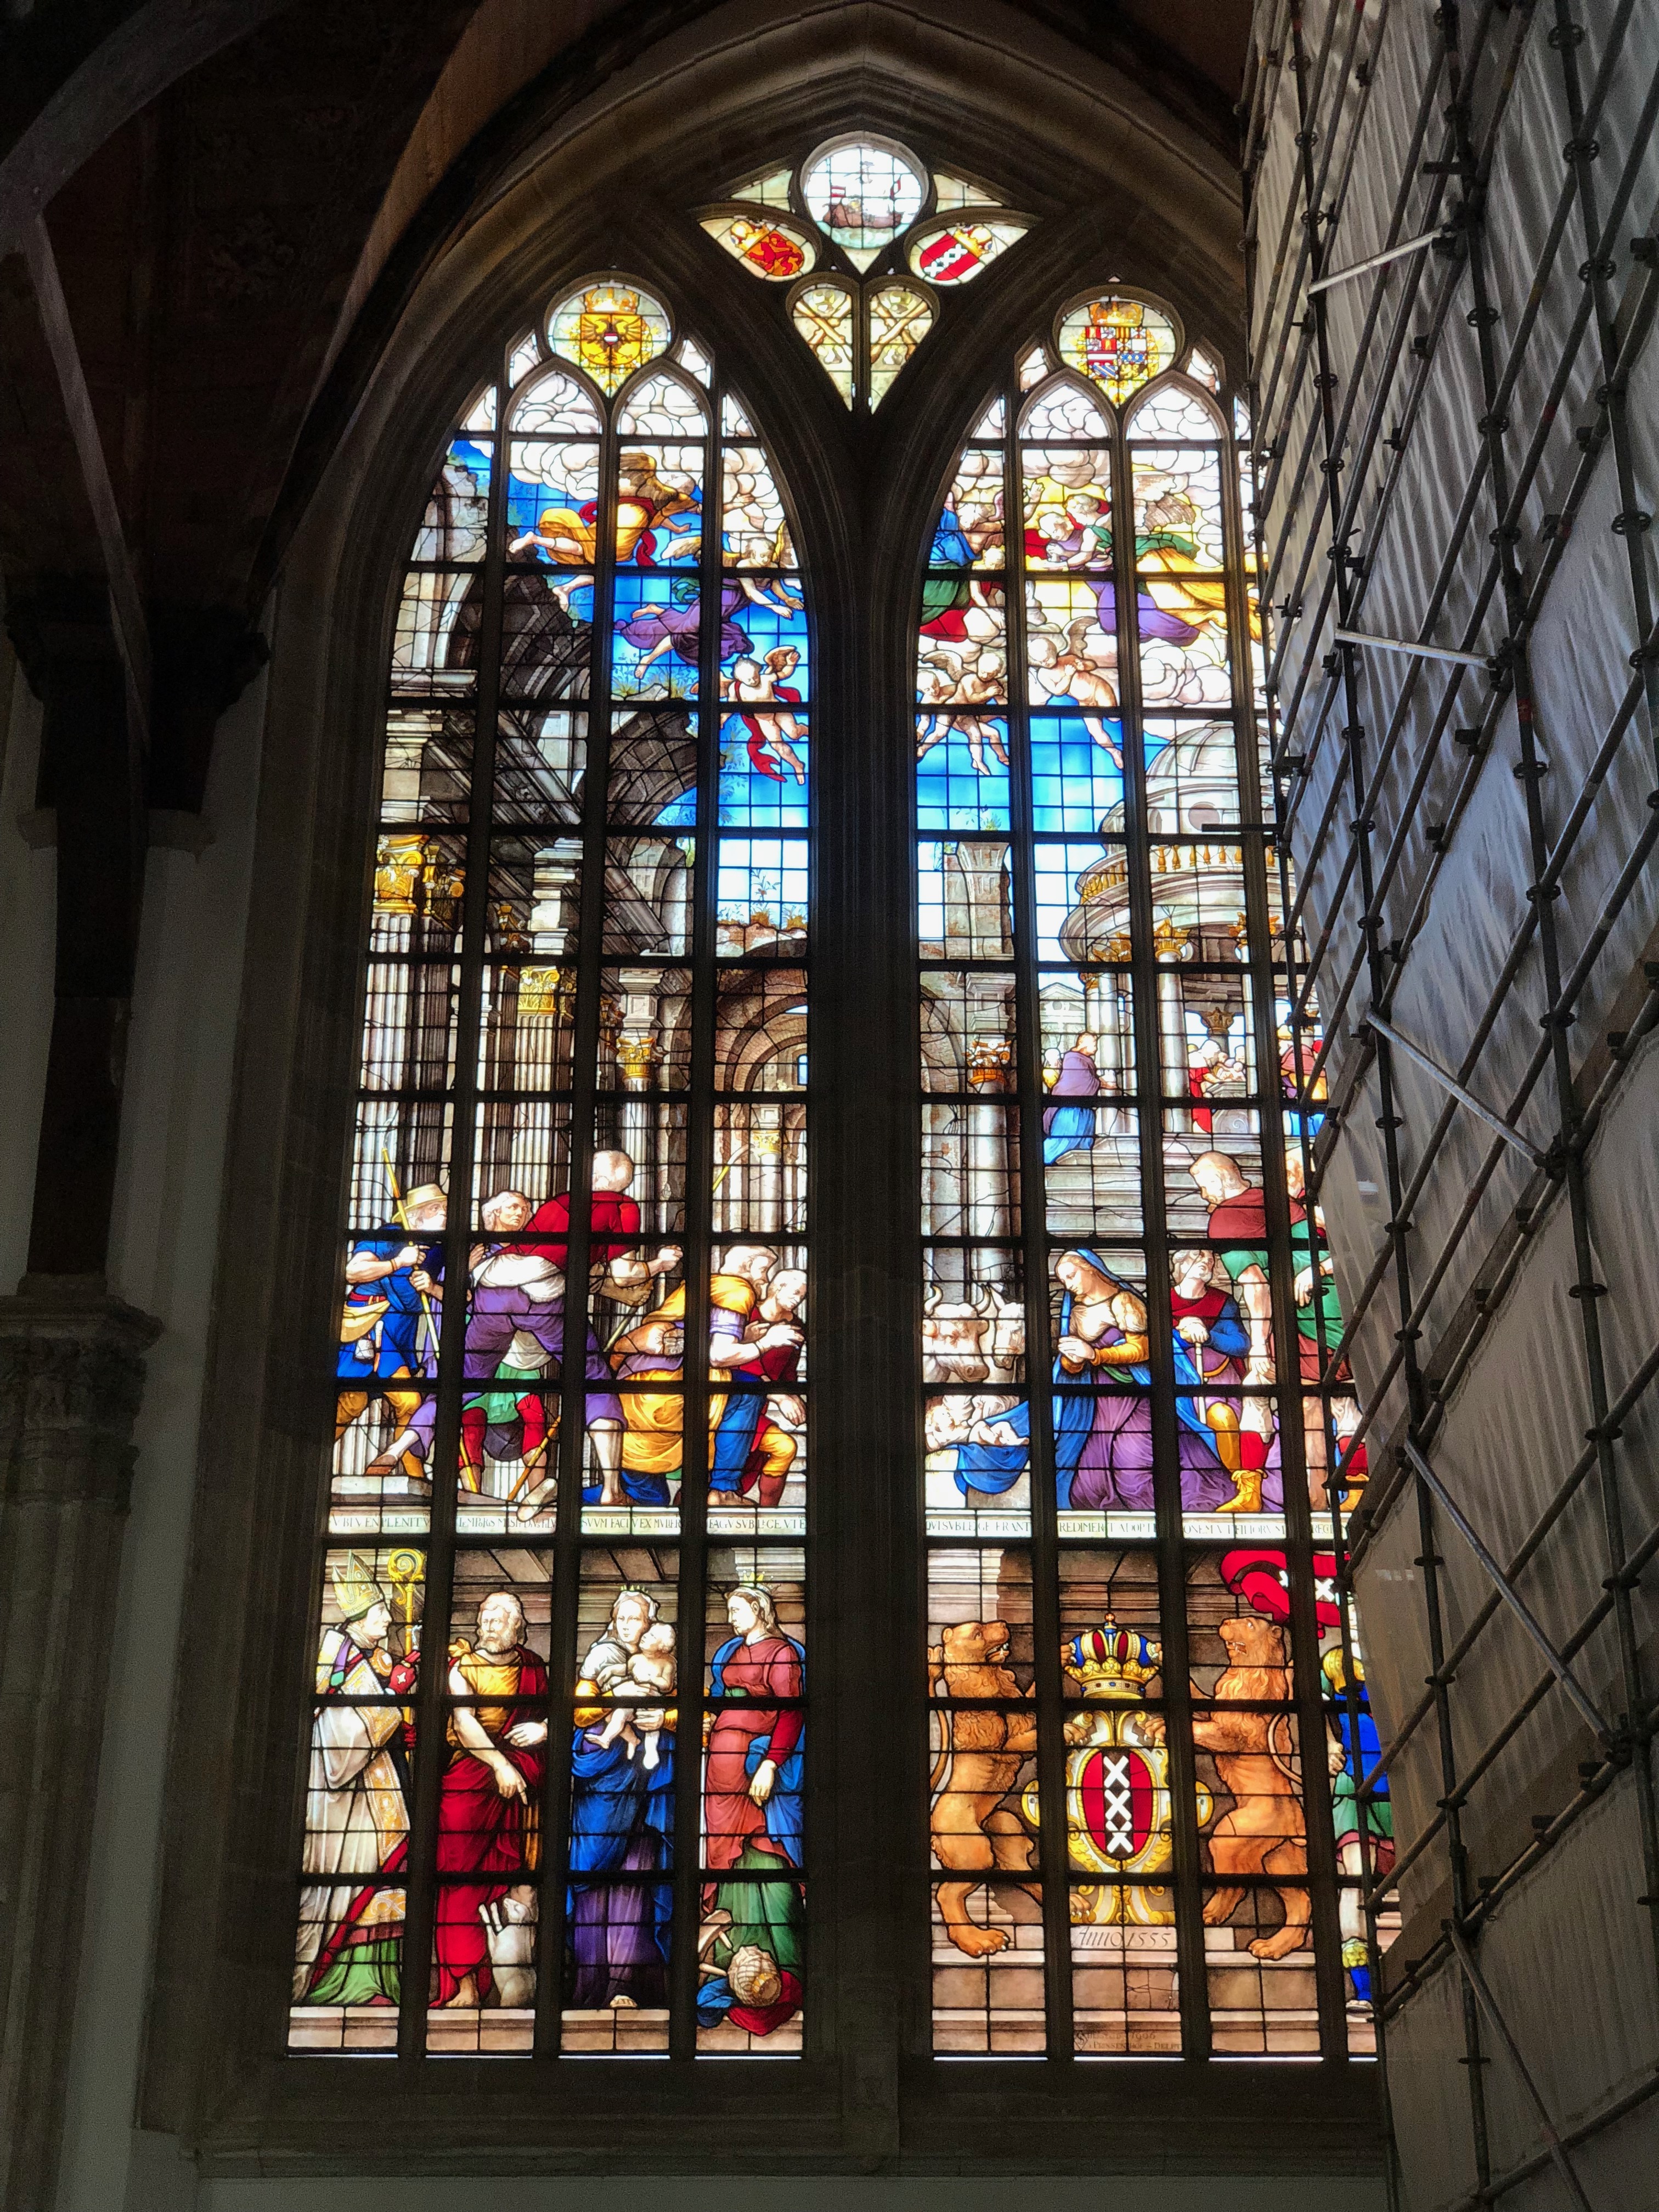 One of the many stained glass windows that miraculously survived the Reformation